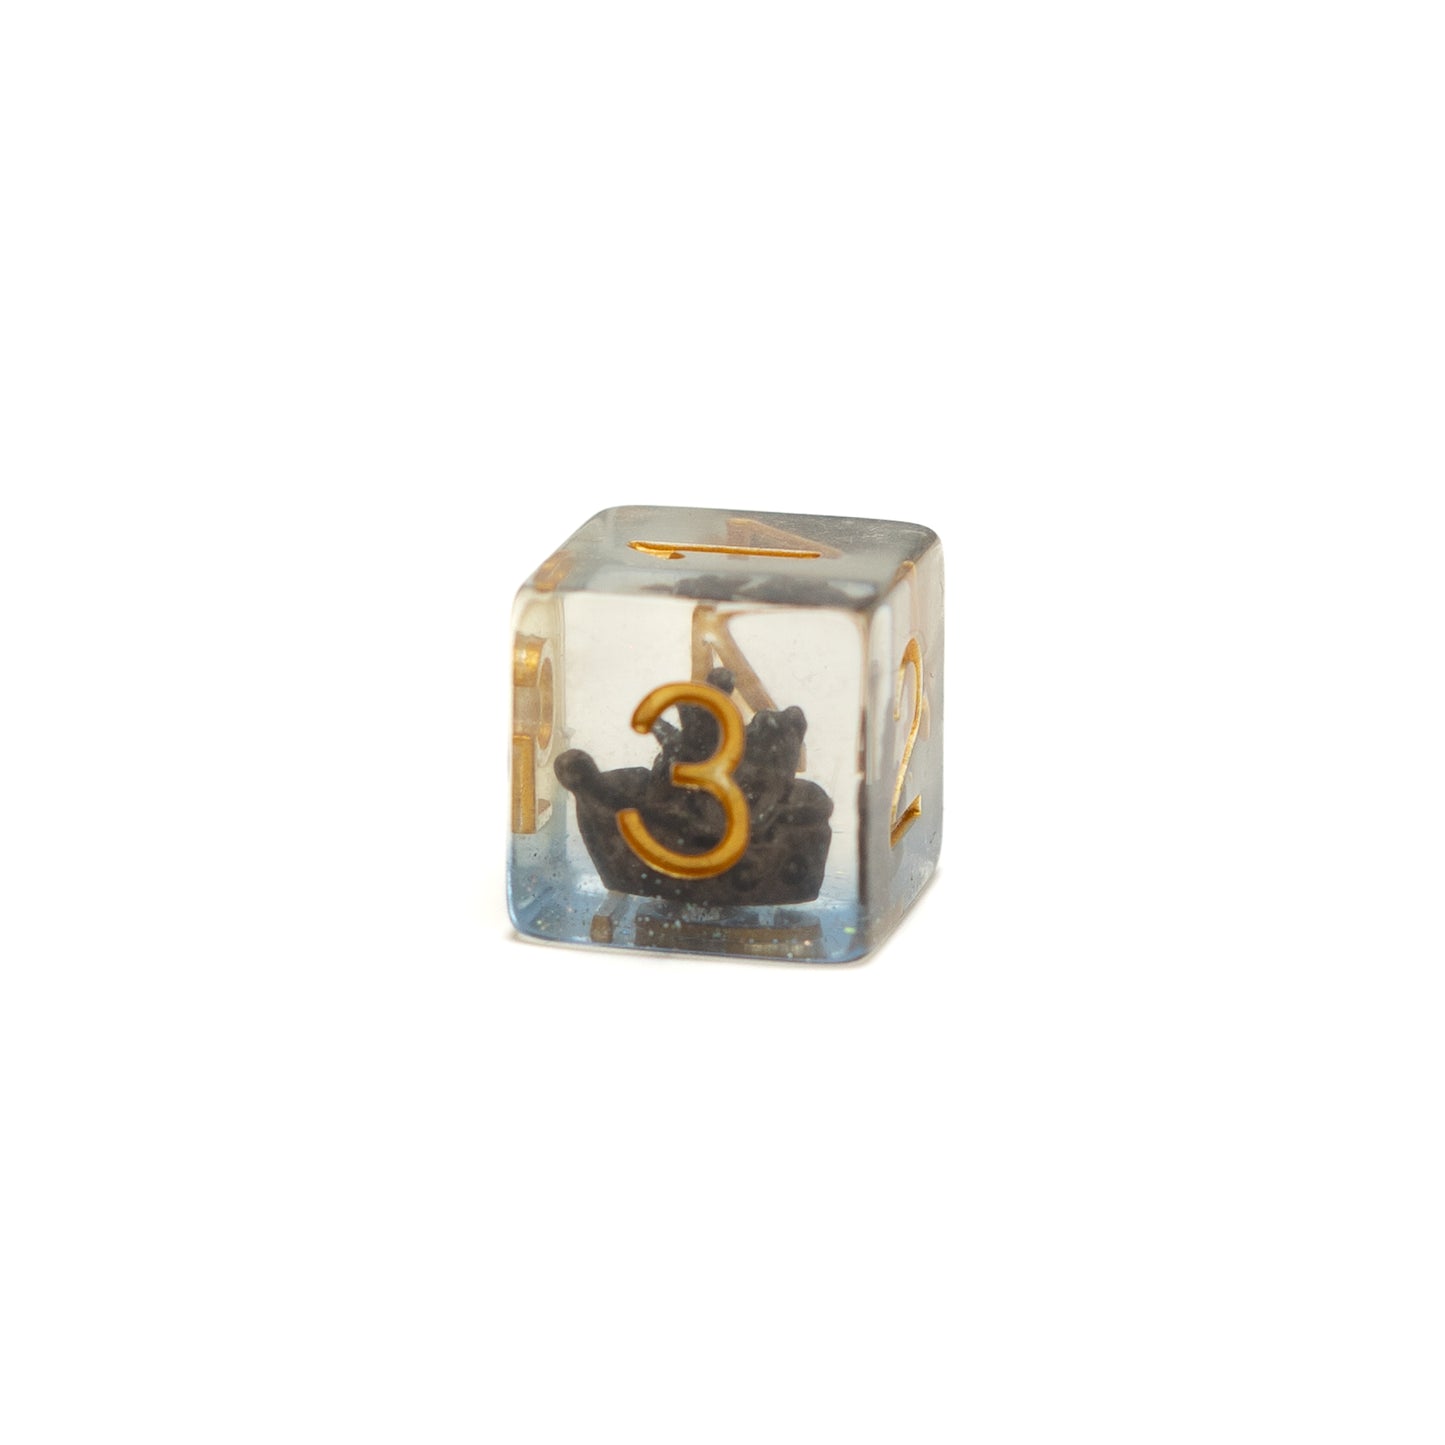 Roll Britannia Captain Timbers Dungeons and Dragons D6 acrylic dice with ship and ocean inside